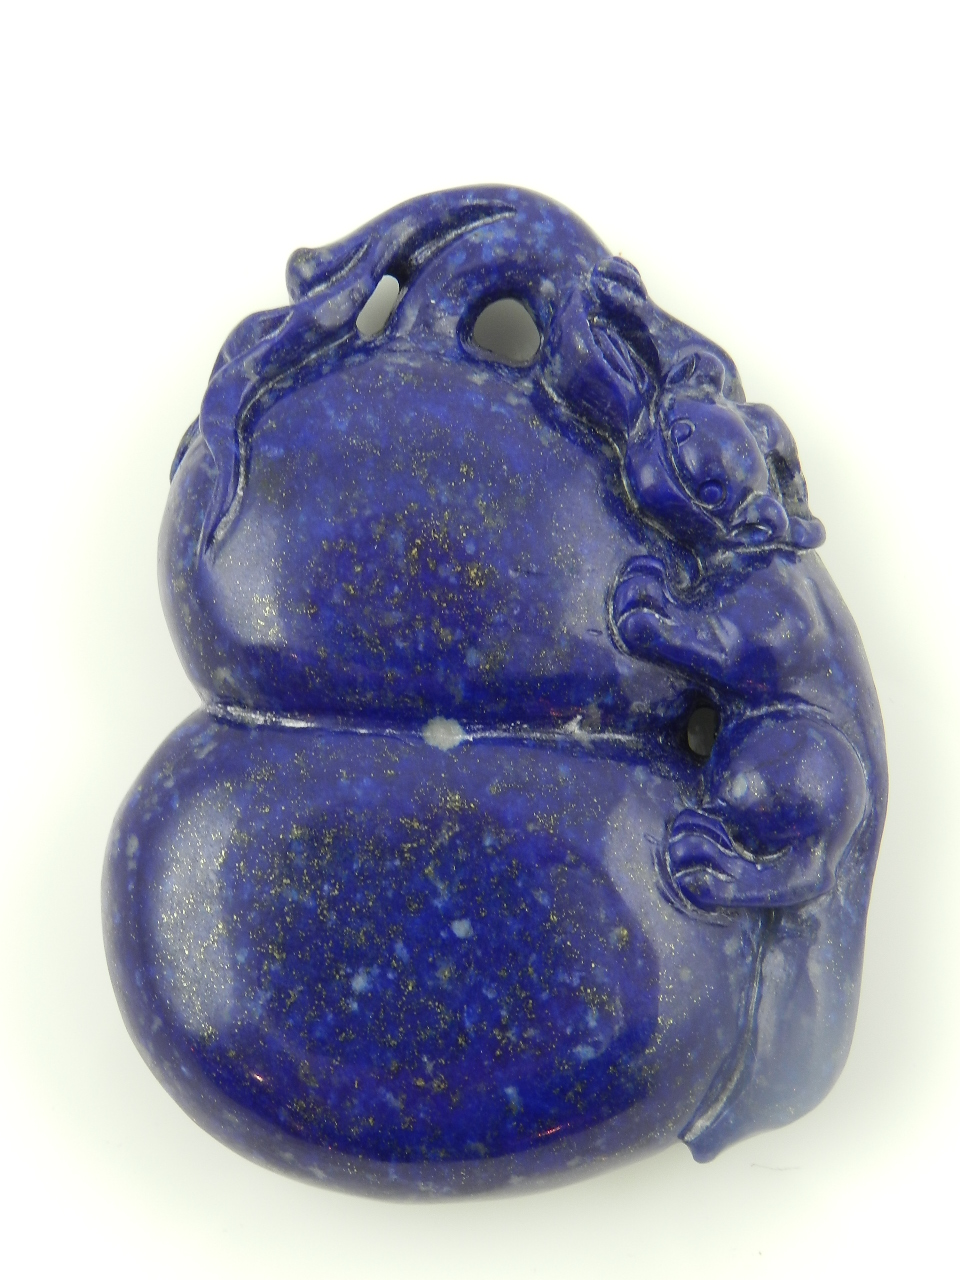 A Chinese lapis lazuli paperweight carved with a Chinese dragon.